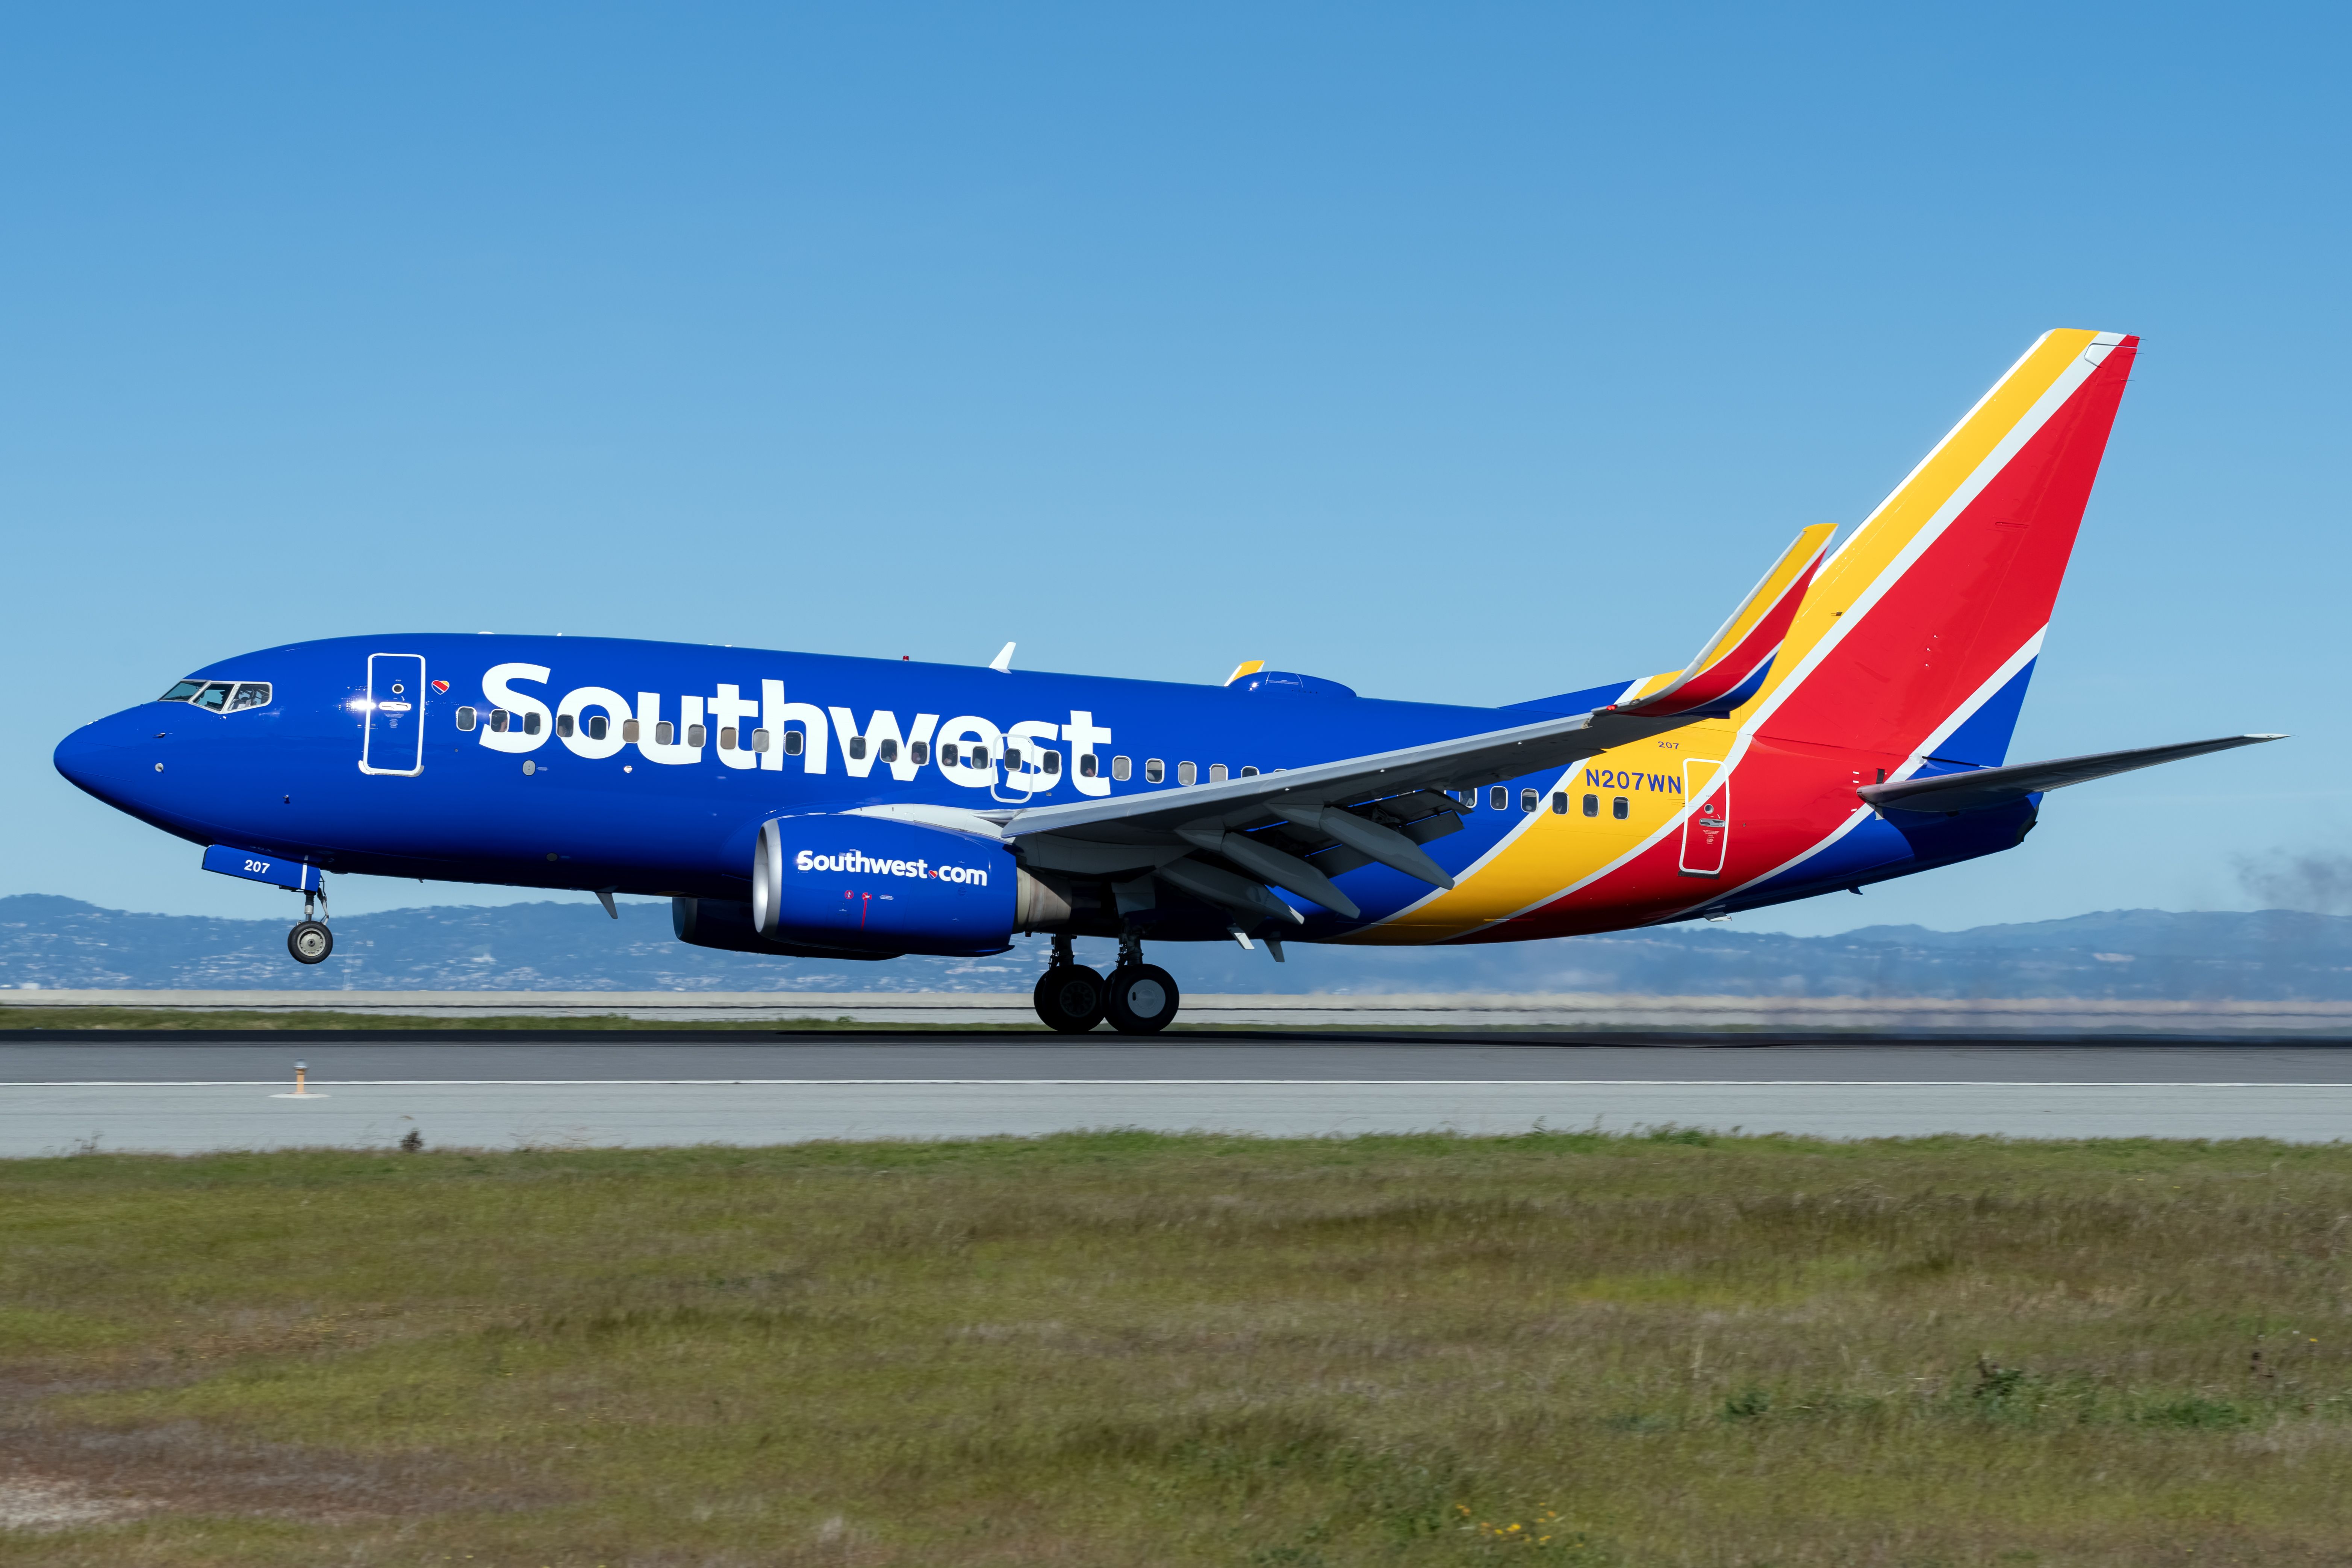 A Southwest Airlines Boeing 737-700 as it takes off.